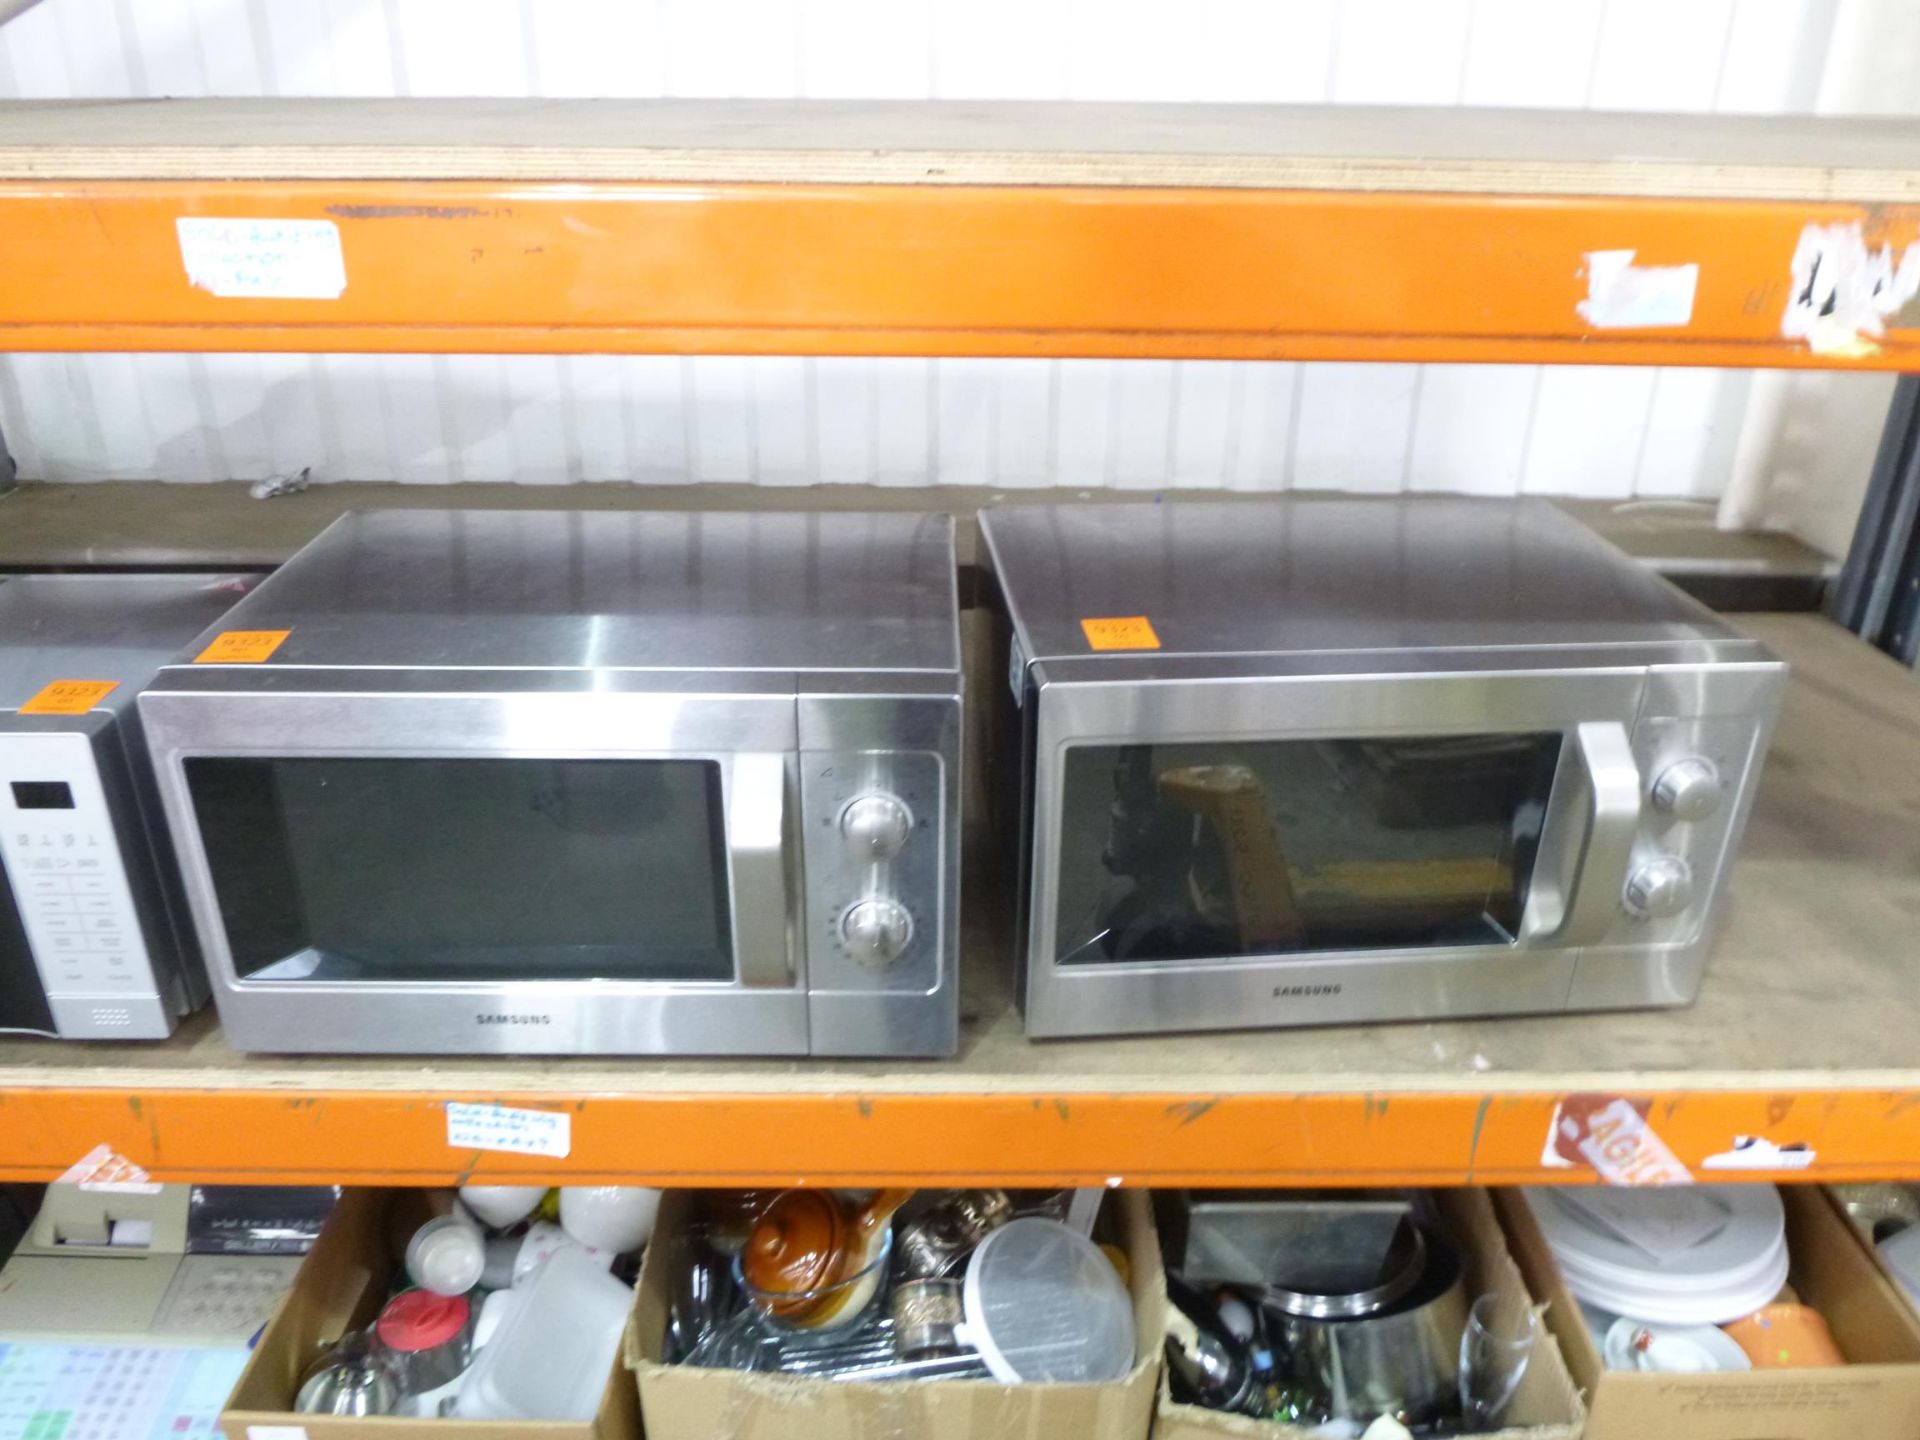 2 x Samsung Stainless Steel Microwaves and 2 x Morphy Richards Microwaves(Unknown Condition). - Image 2 of 3